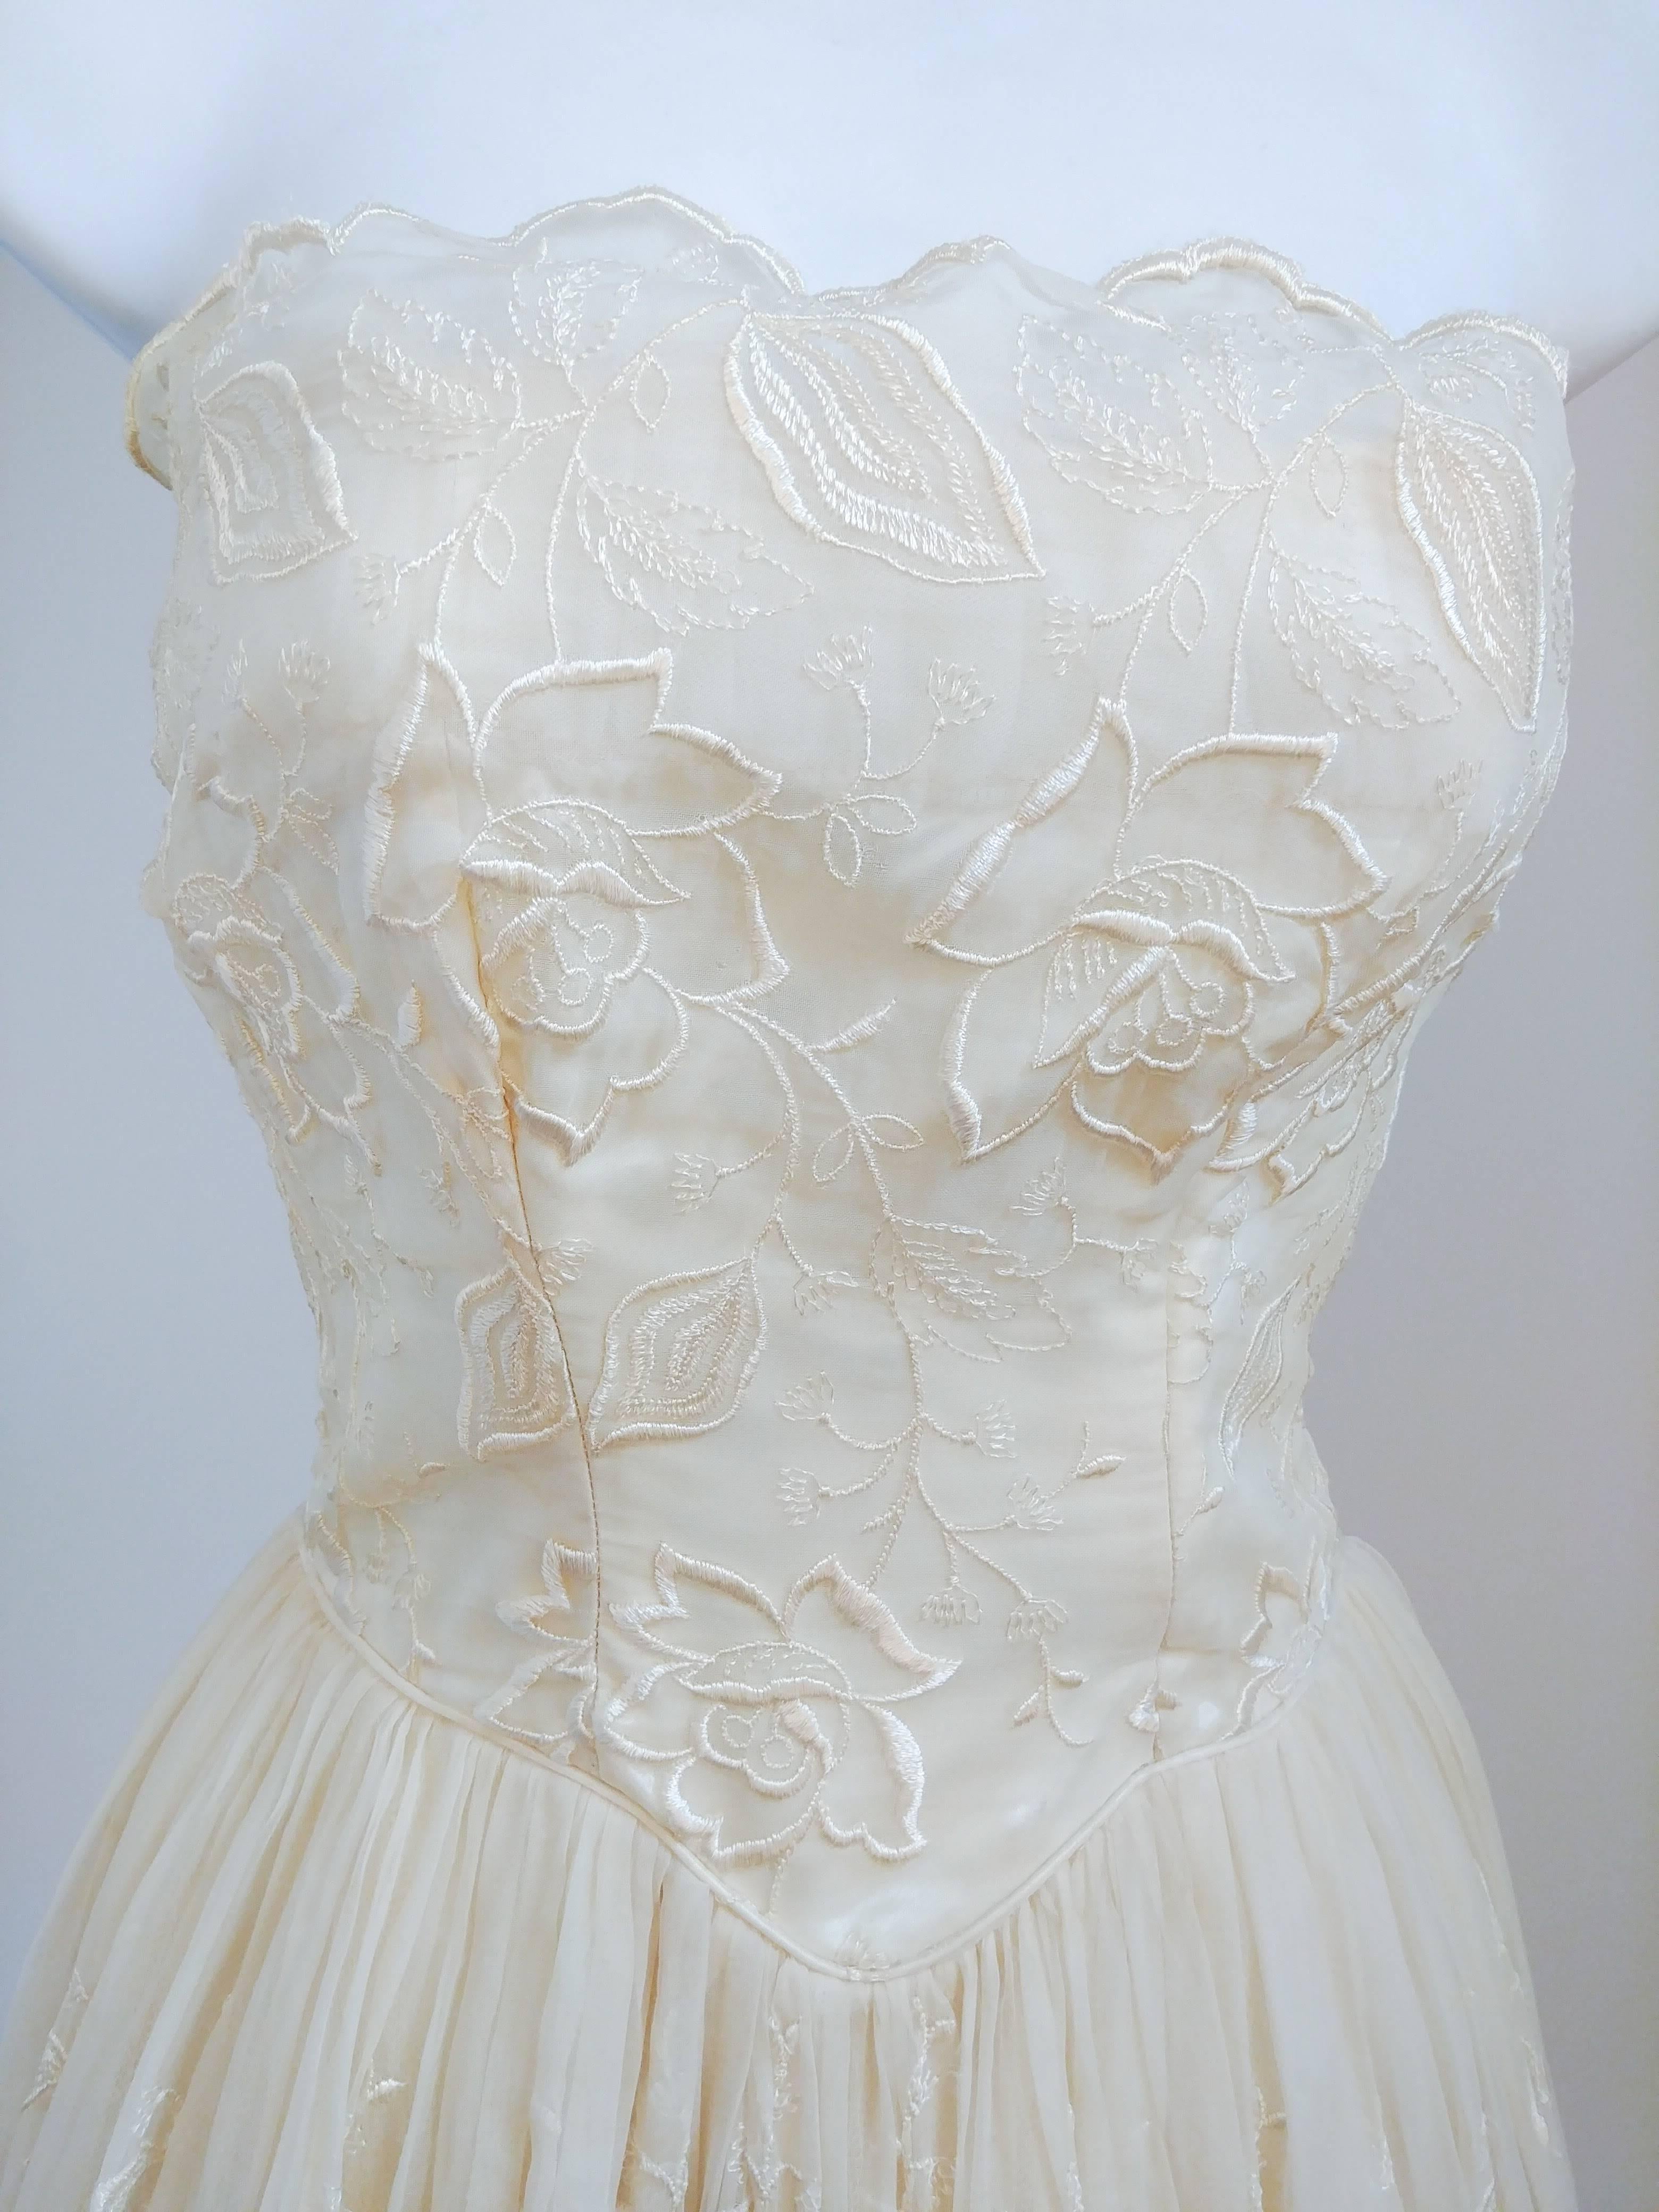 1950s Ivory Strapless Embroidered Lace Gown. Strapless bodice with embroidered rose lace overlay, basque waist, and full gathered skirt. Zips up back.  